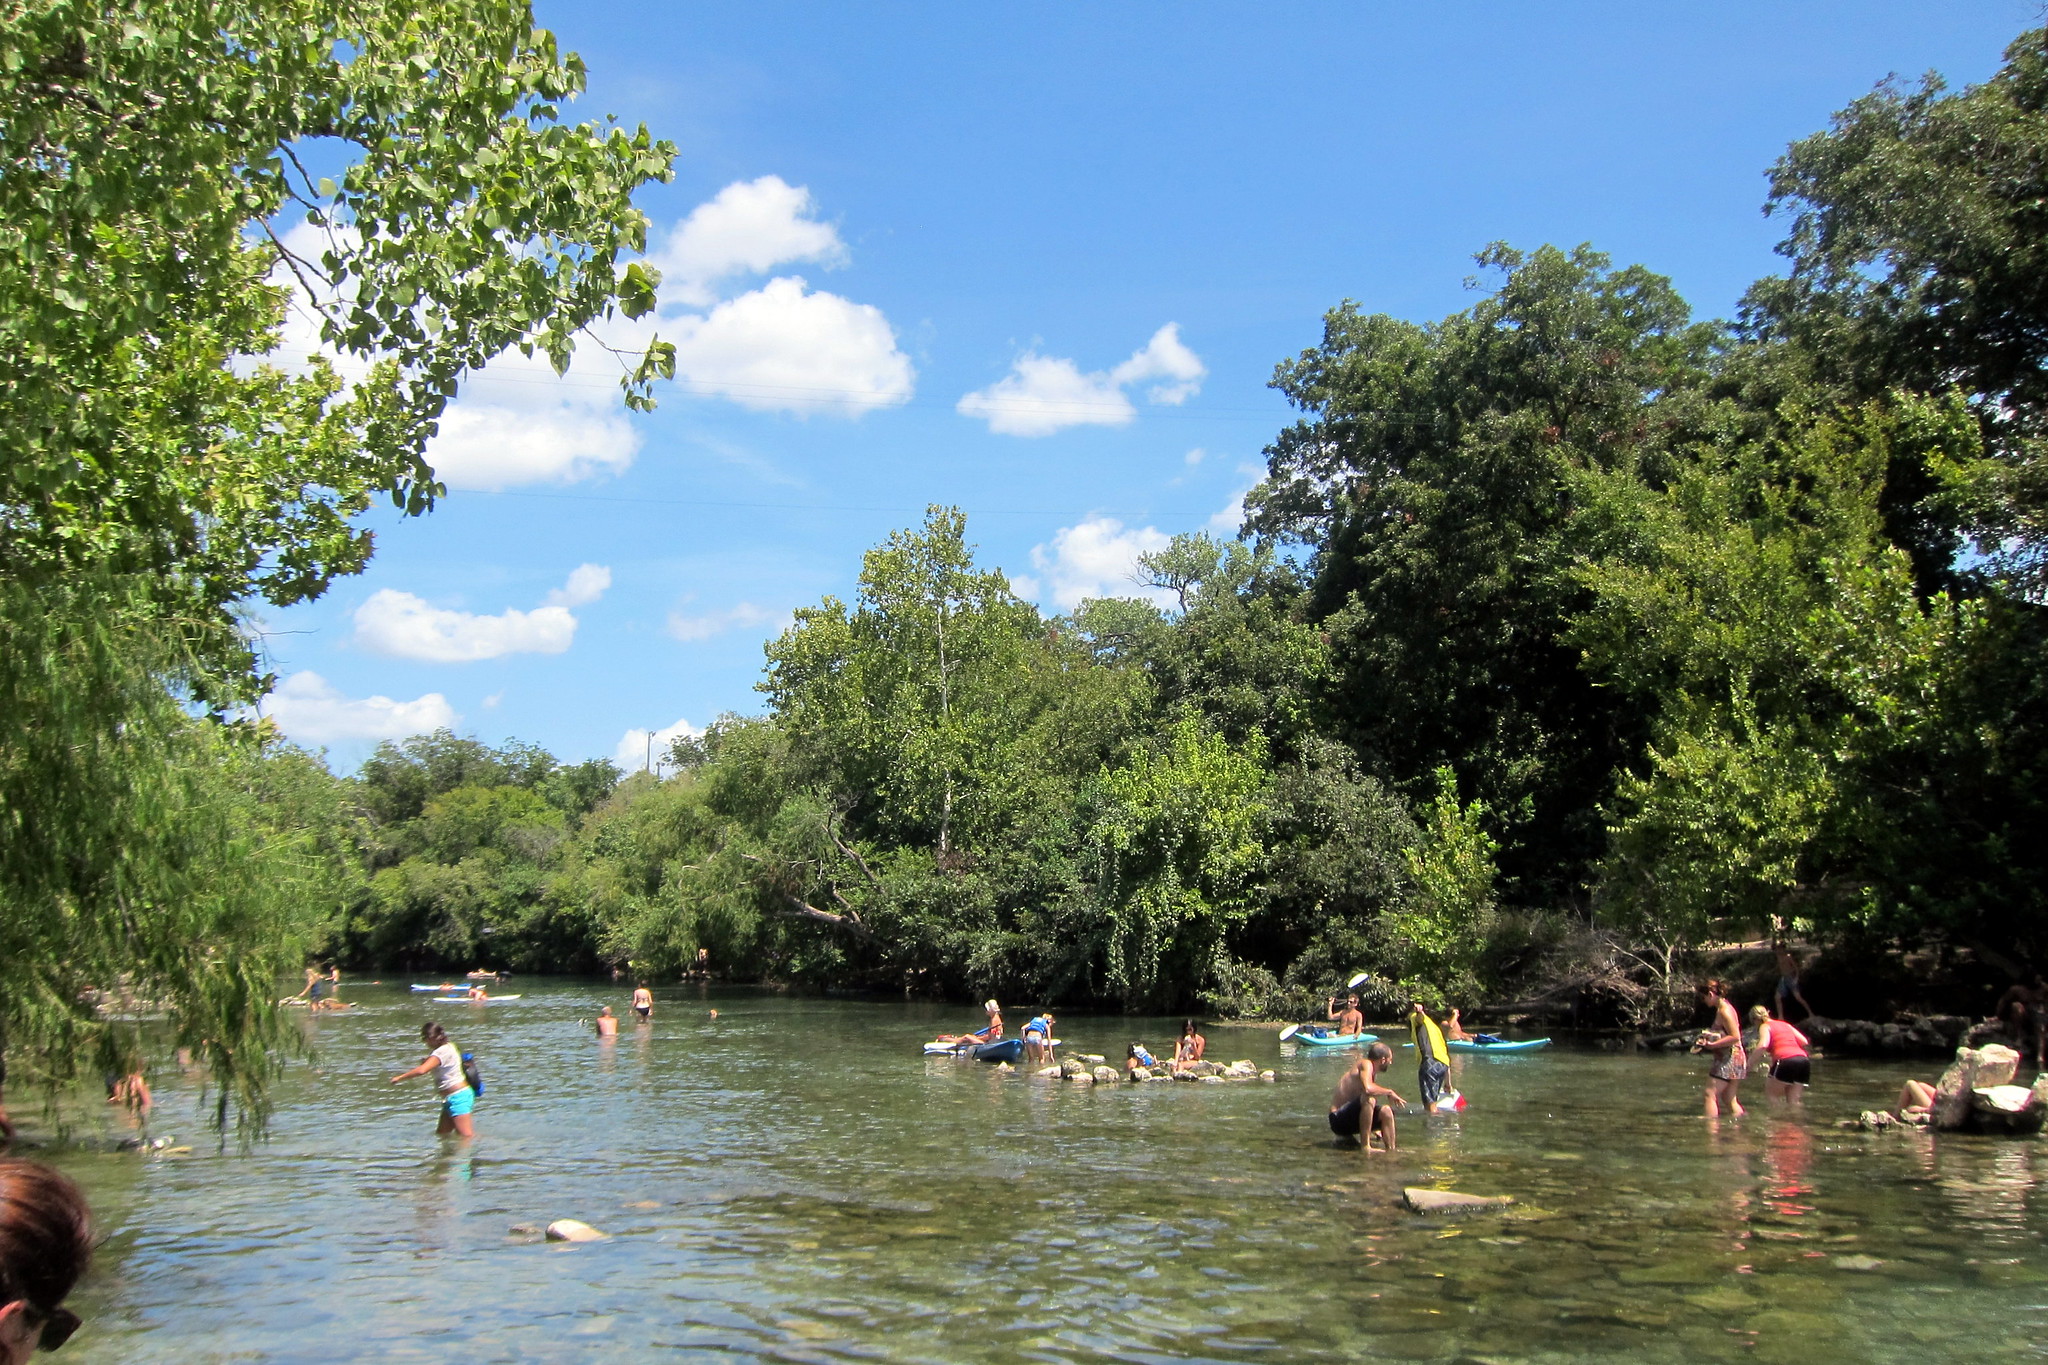 Barton Creek being enjoyed by swimmers and paddle boarders